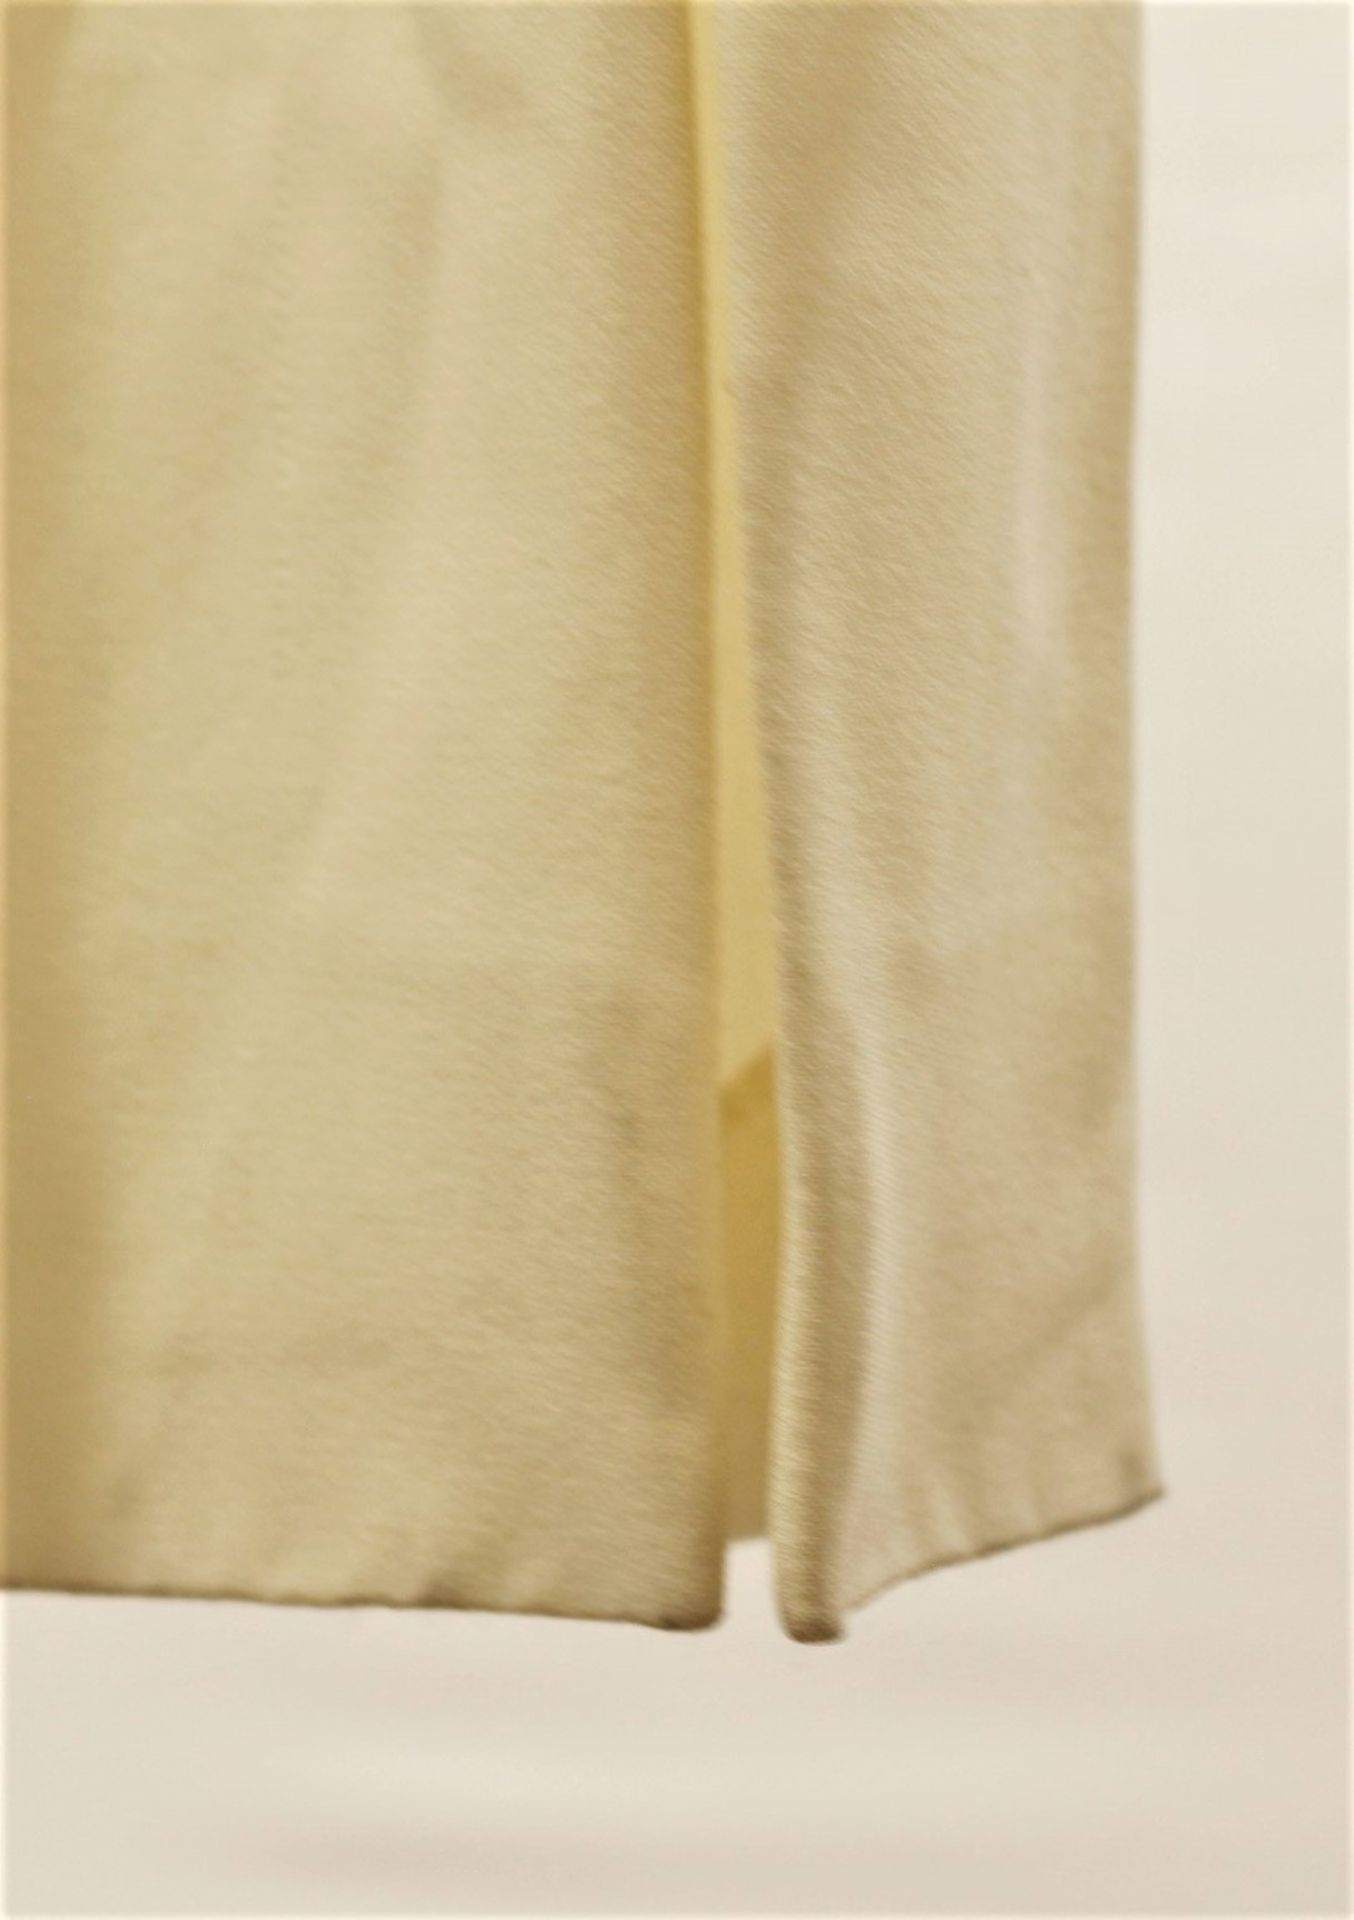 1 x Boutique Le Duc Cream Suit (Jacket And Trousers) - Size: 12 - Material: 82% Acetate, 18% Viscose - Image 10 of 13